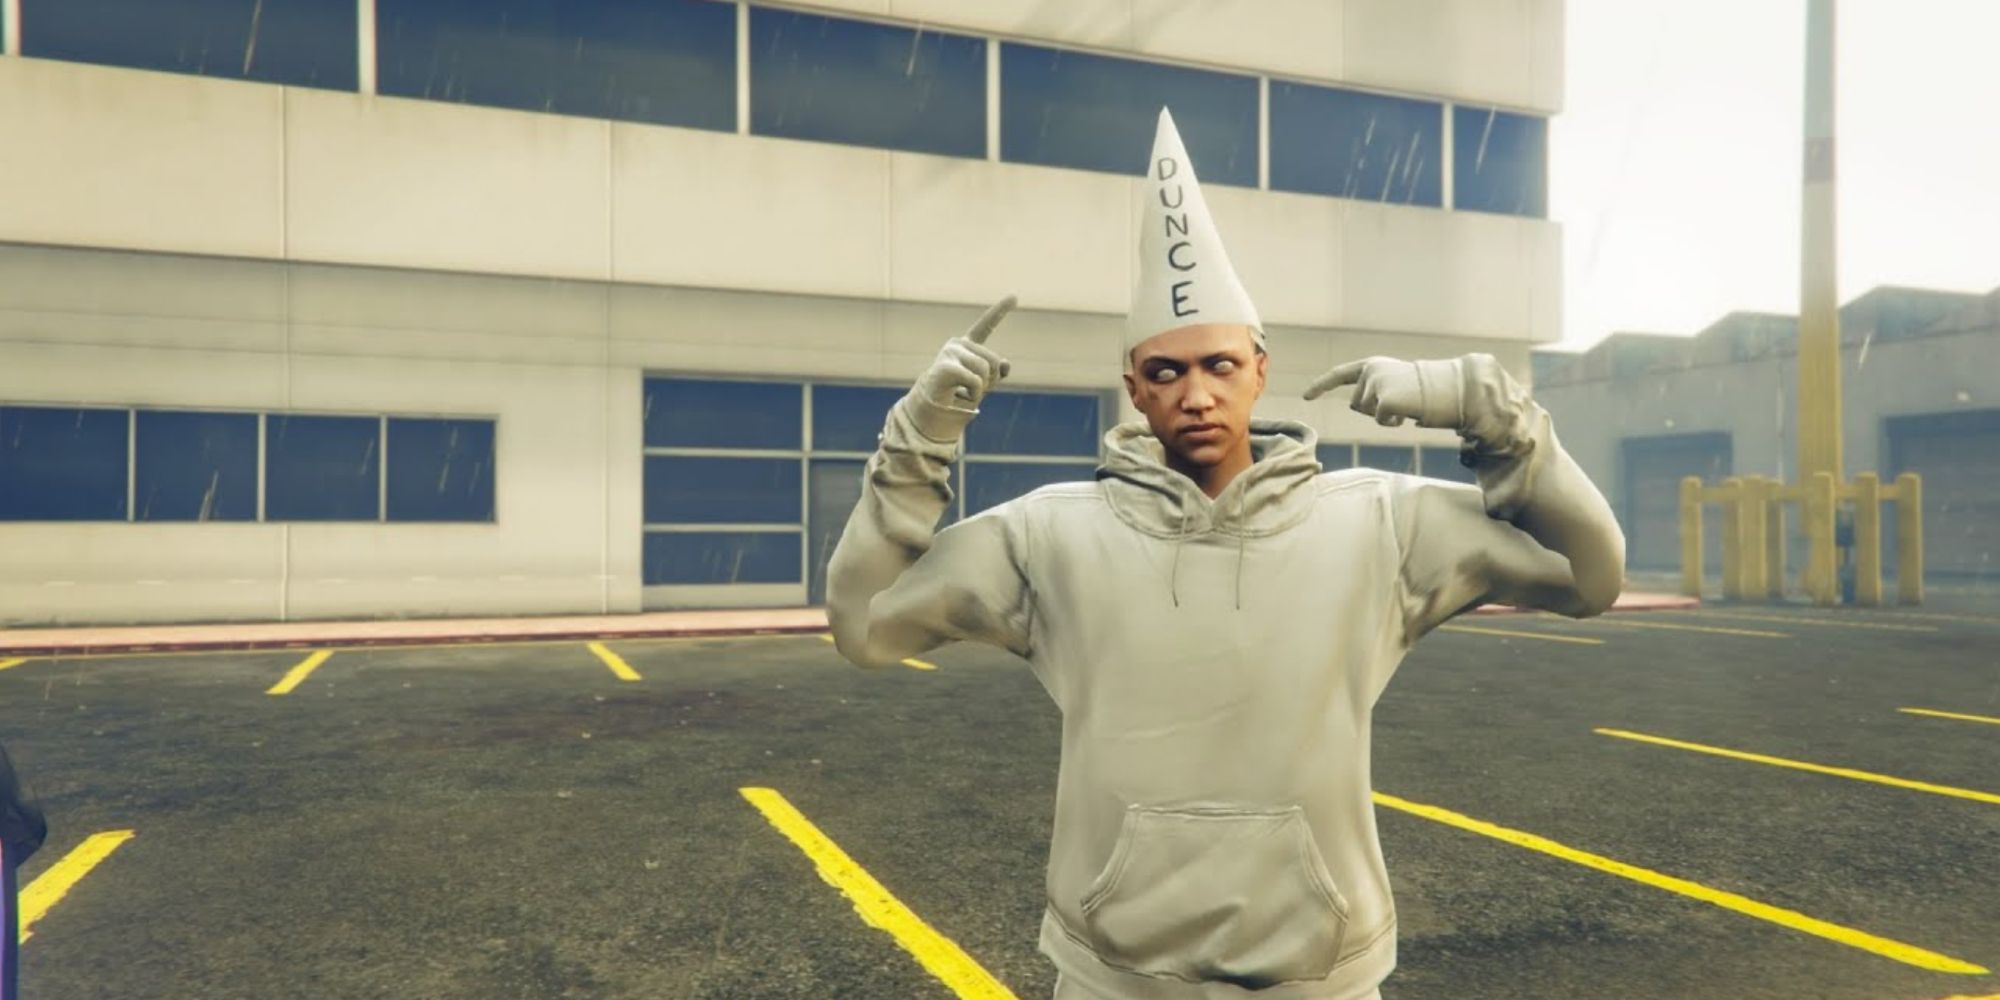 GTA V Dunce Cap was permanently equipped to trolling characters